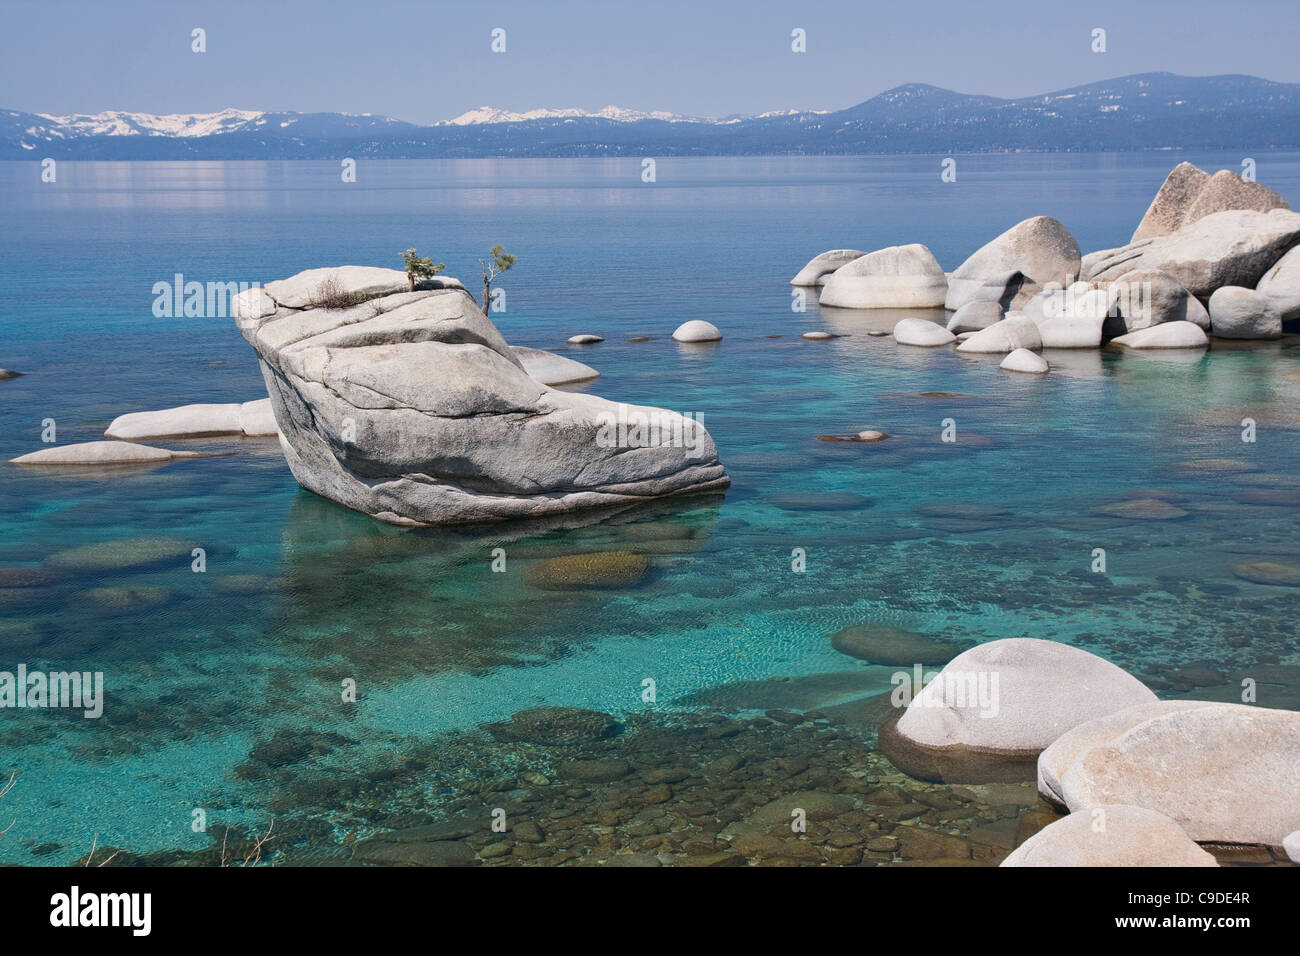 Bonsai rocks in a lake with mountains in the background, East Shore, Lake Tahoe, Nevada, USA Stock Photo